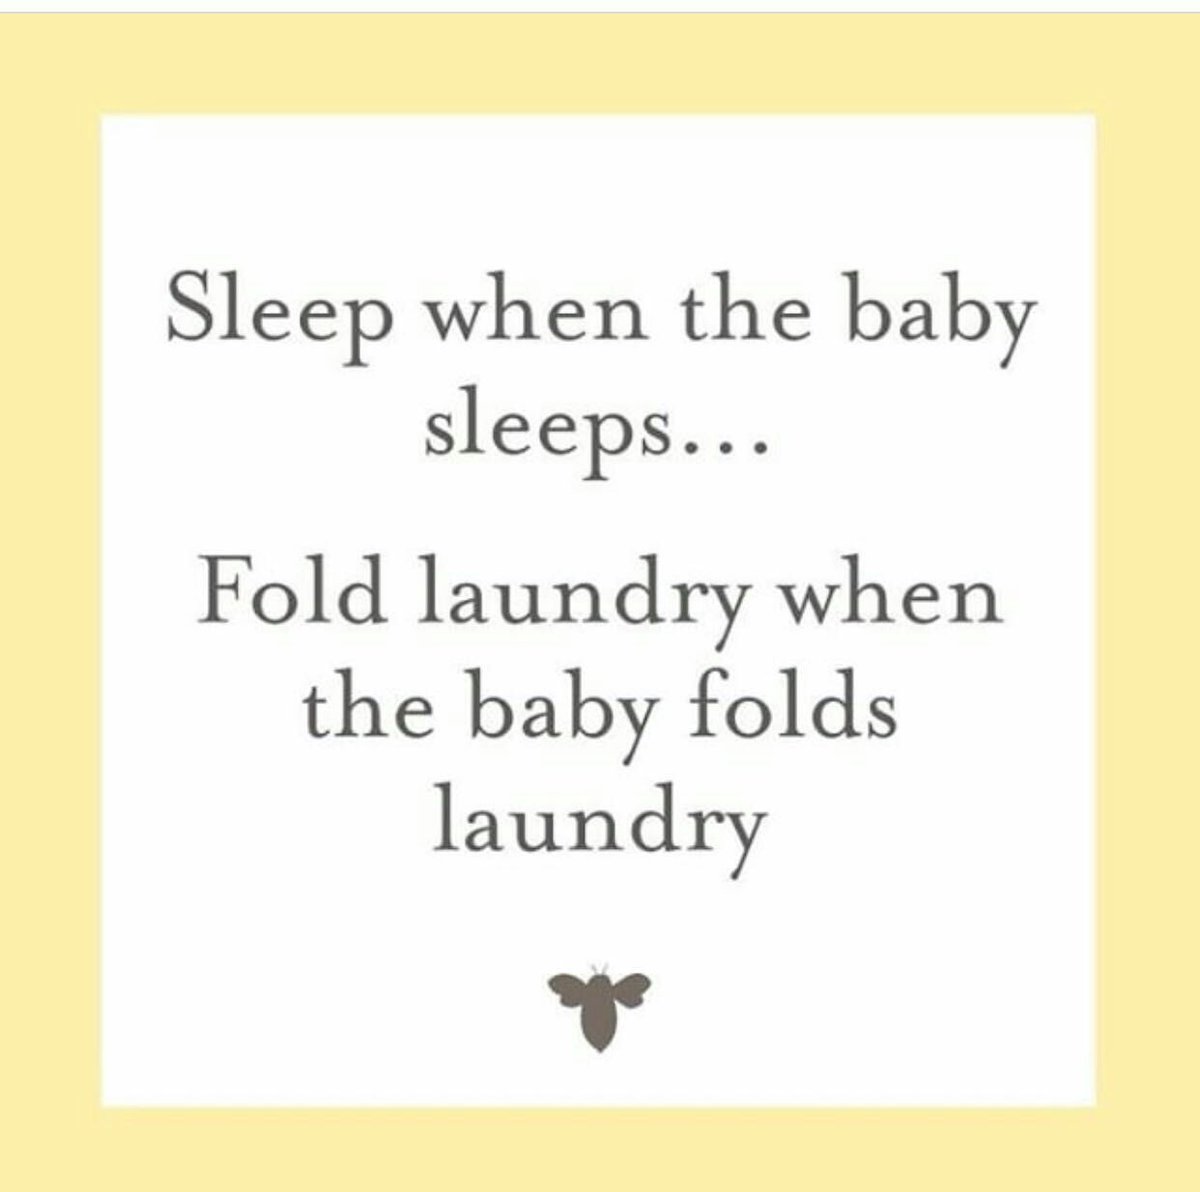 Haha if only this were true! [Image reads sleep when the baby sleeps, fold the laundry when the baby folds the laundry] #parenting #honestparenting